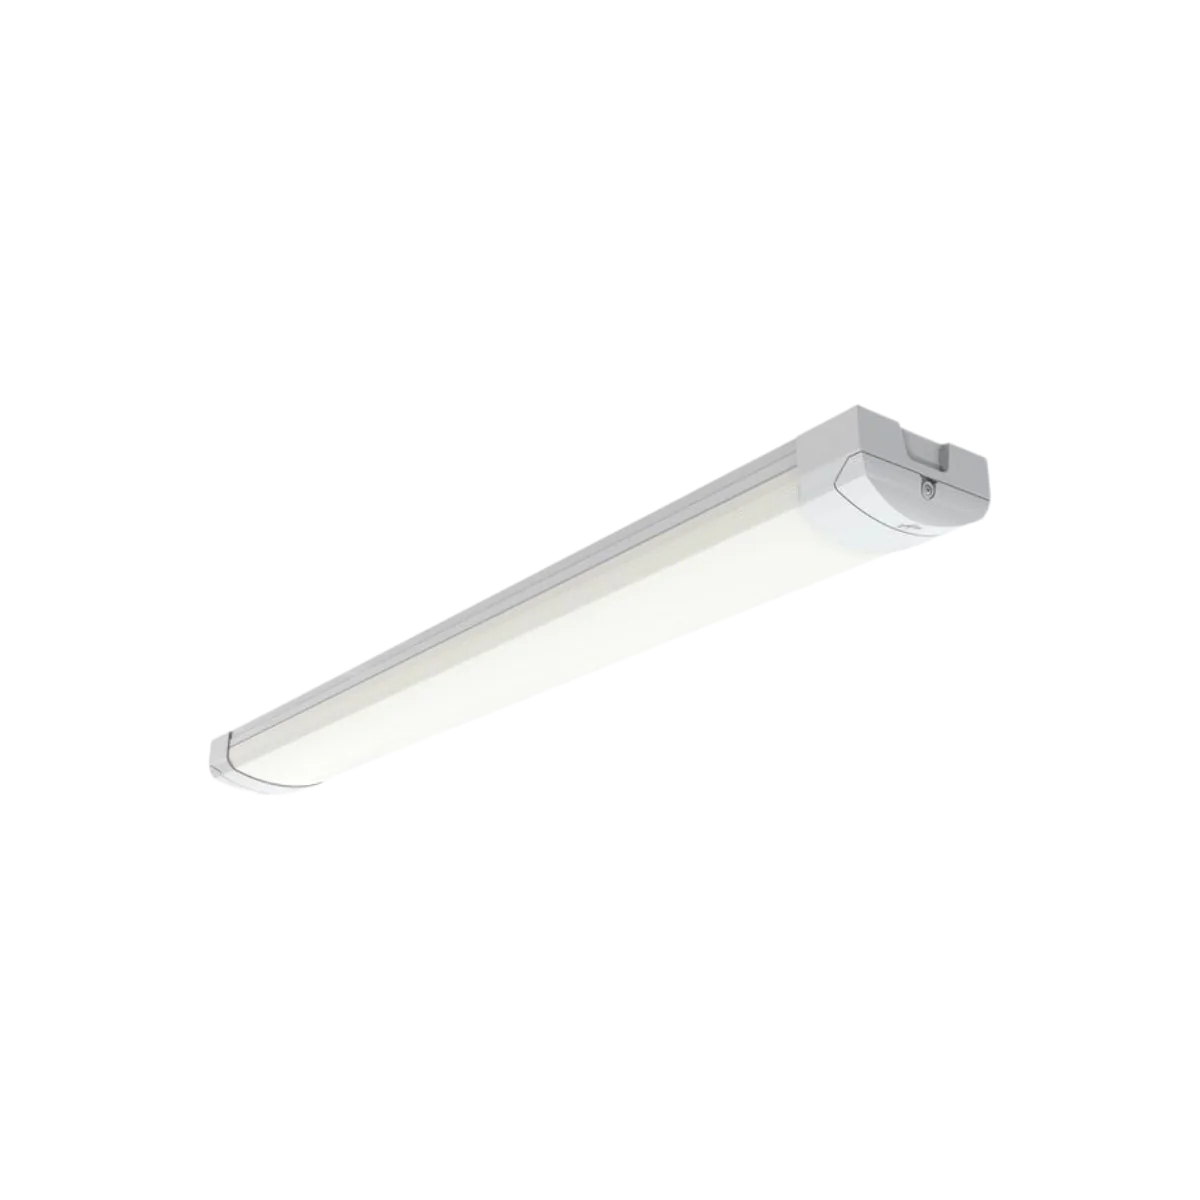 Ansell Lighting APRE4/1 Surface Linear Lighting Shop4 Electrical